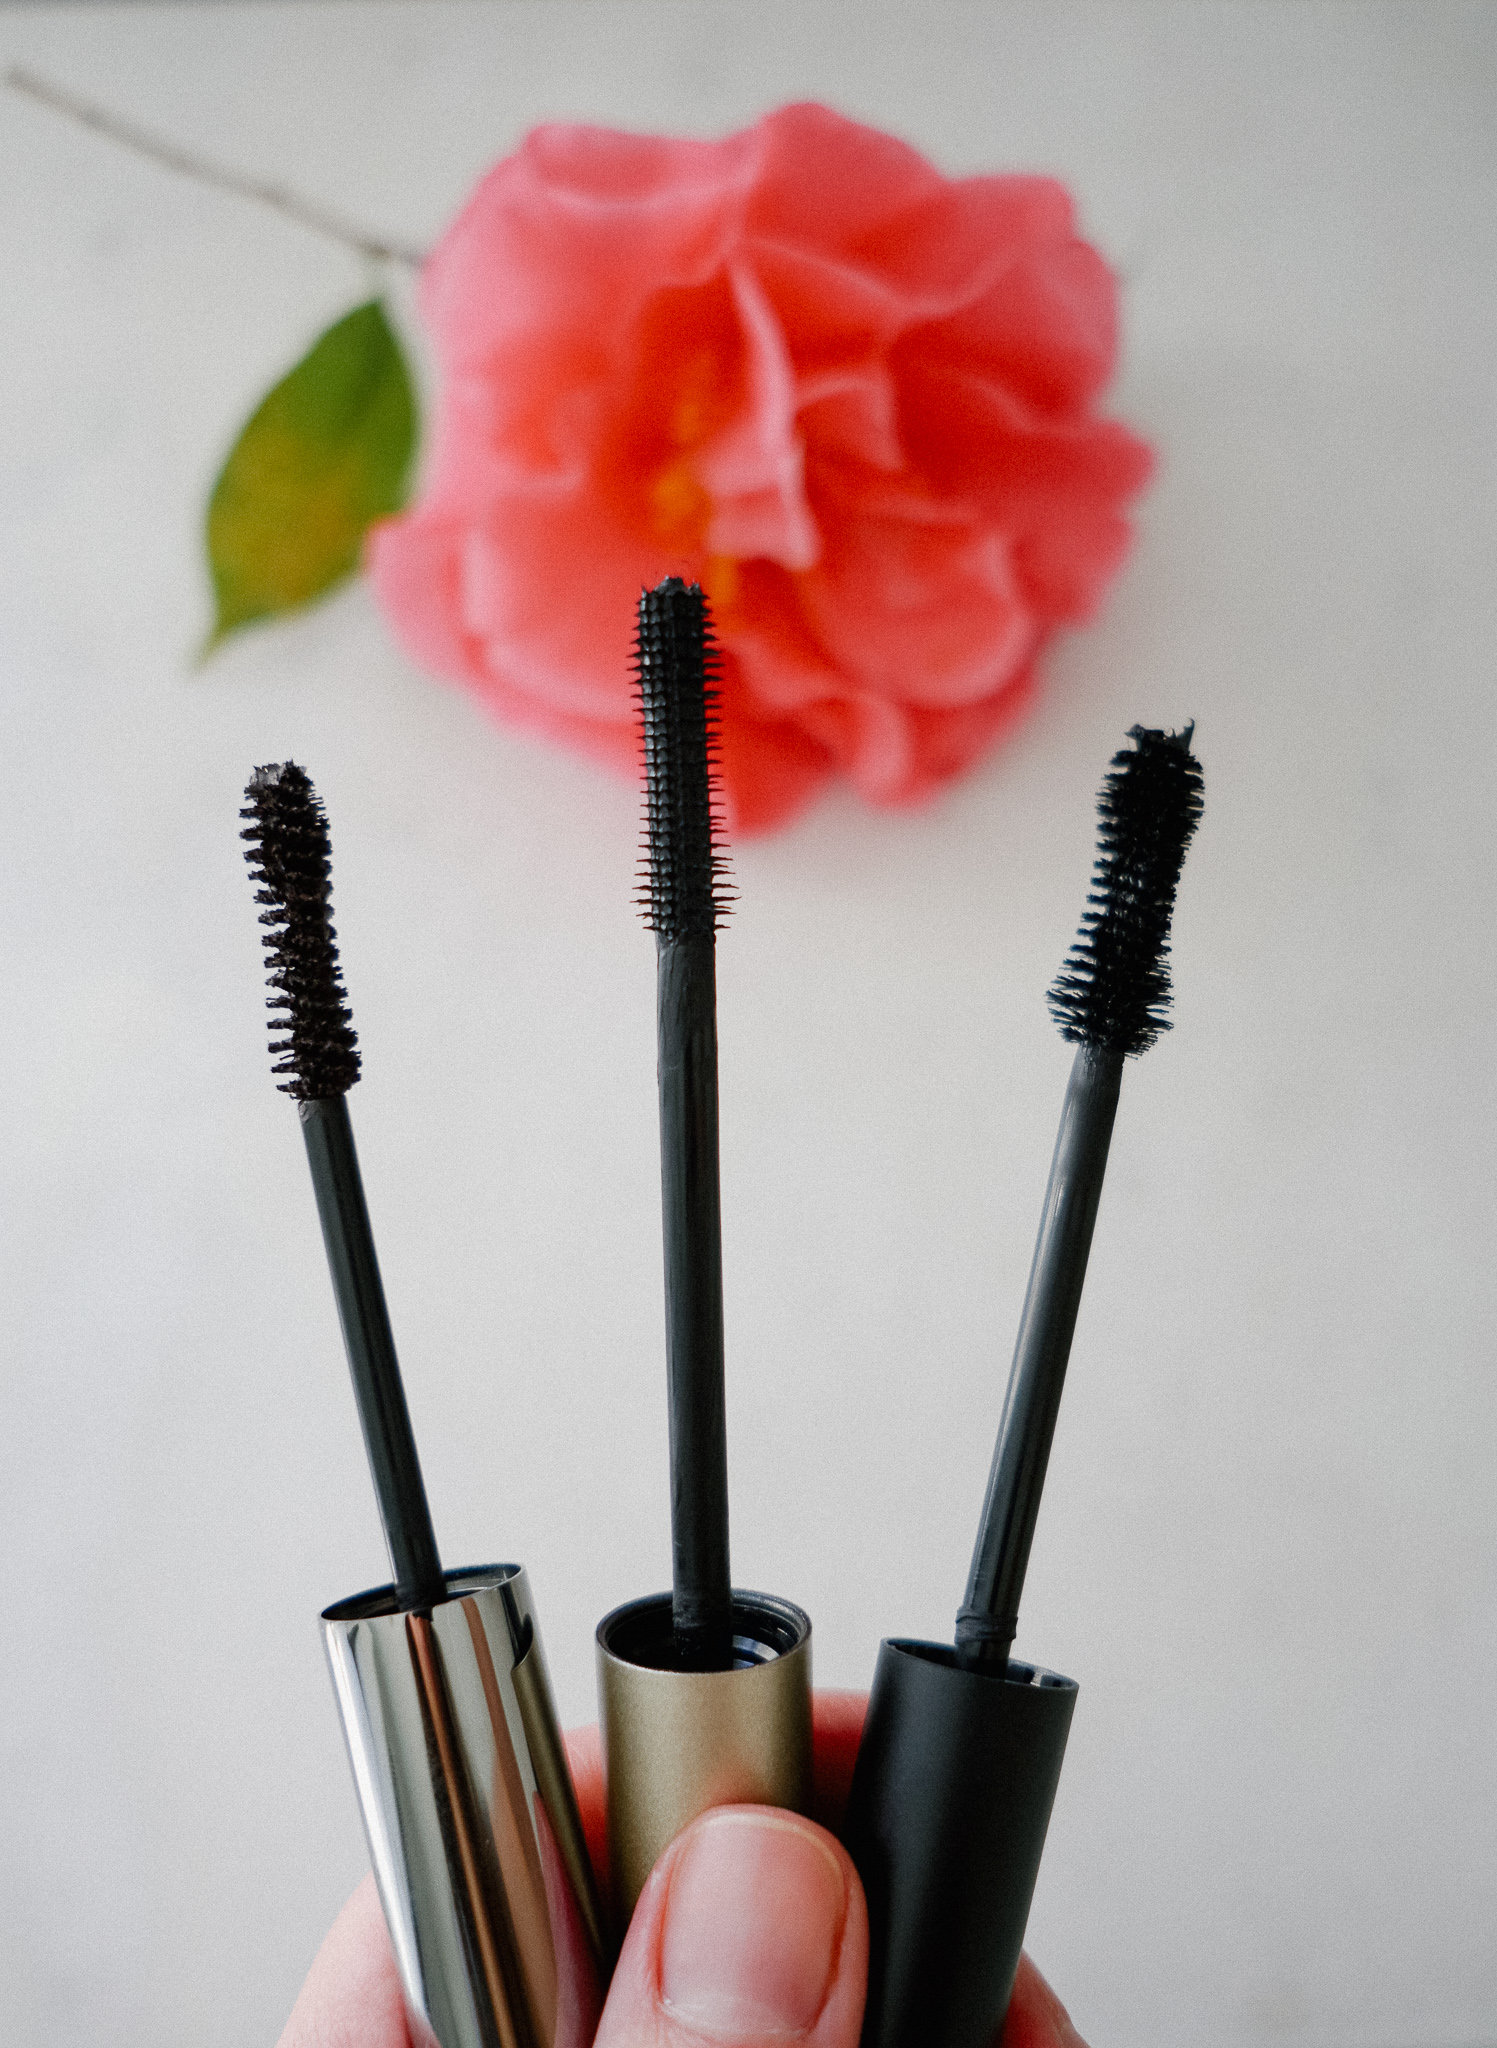 Holding 3 mascara wands out over a flower